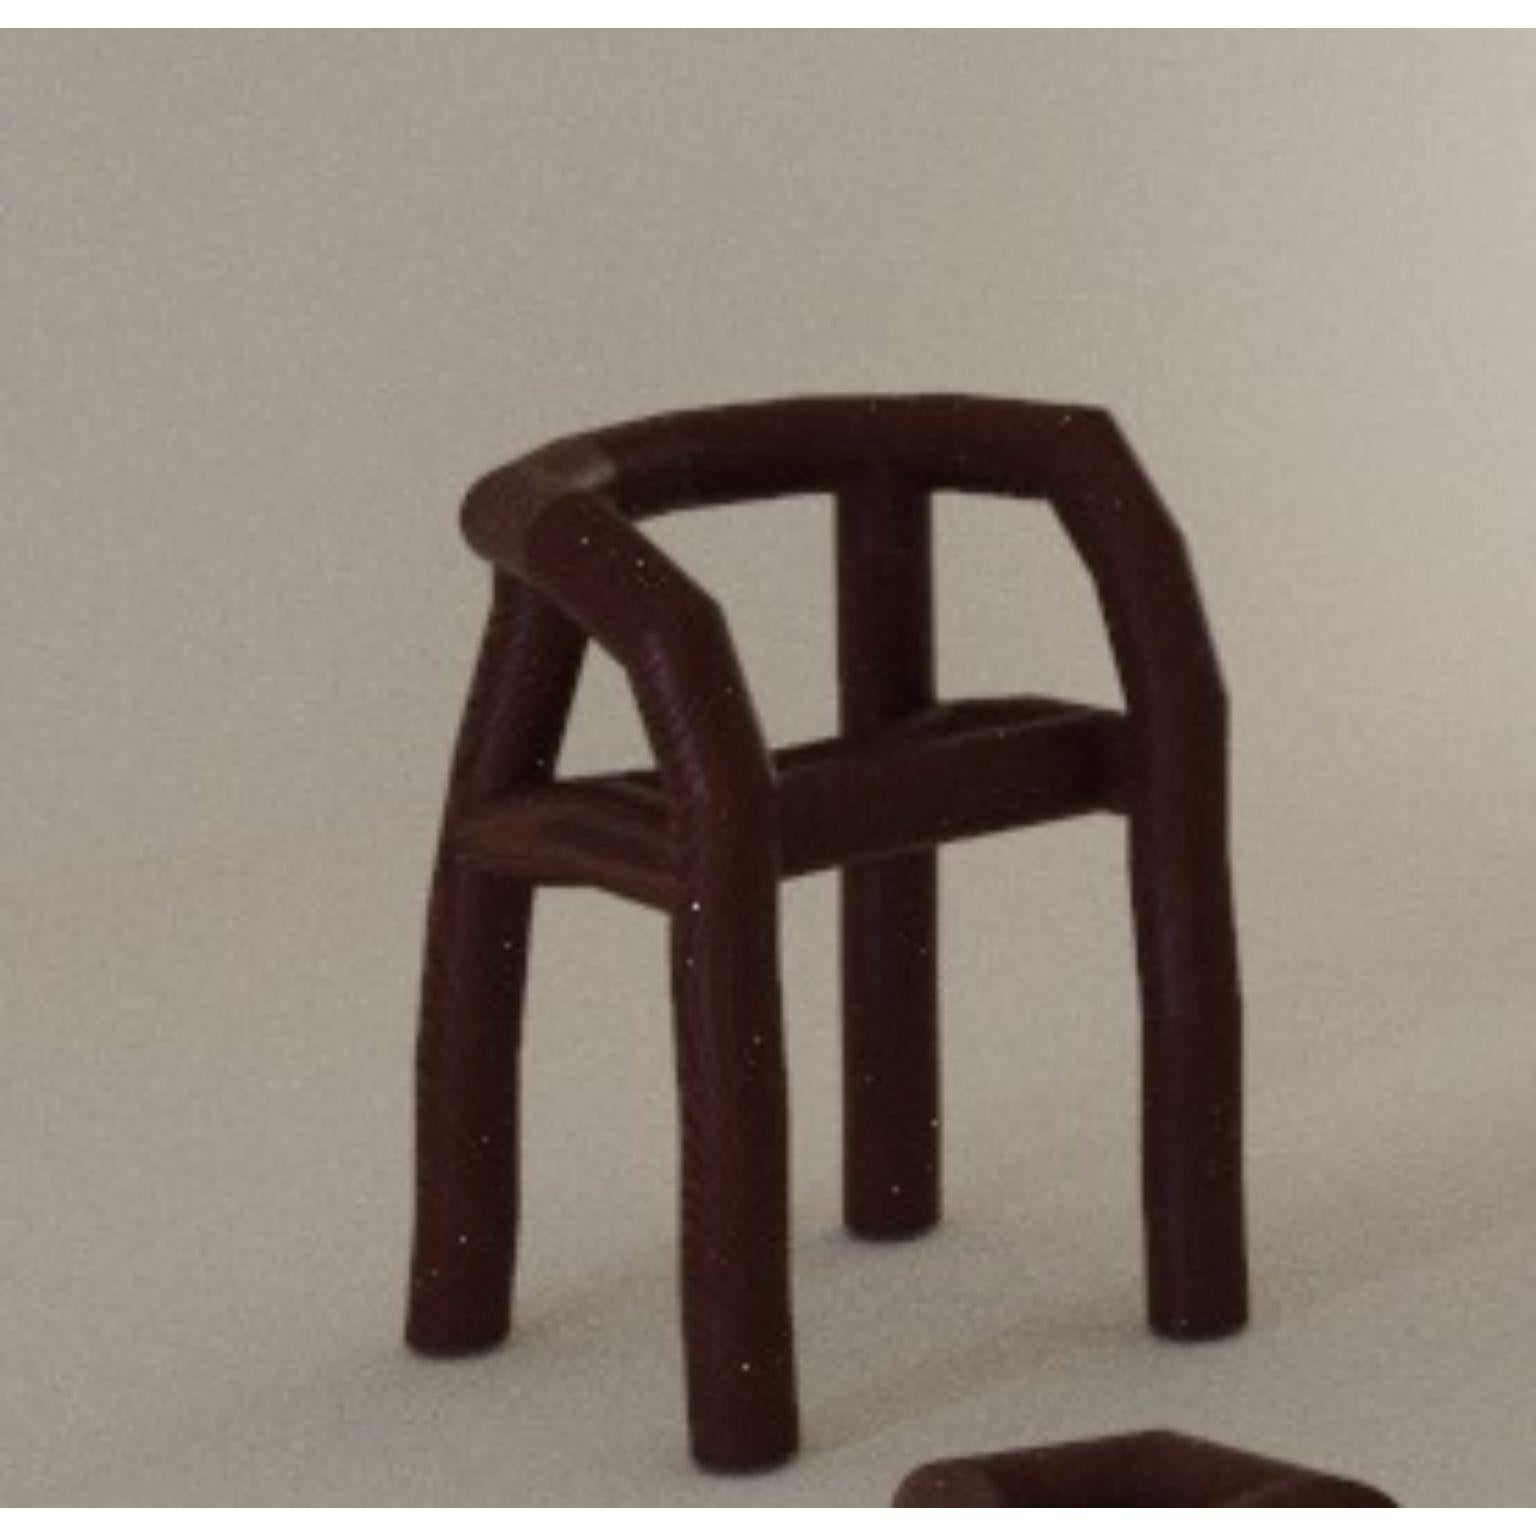 Segmento Pine Logs Chair by Cara Davide
Dimensions: W70 x D60 x H 86 cm.
Materials: Pine logs.
Color: dark brown.
Also available in light brown. Please contact us.

Segmento perceives ordinary objects in an abstracted form through the act of